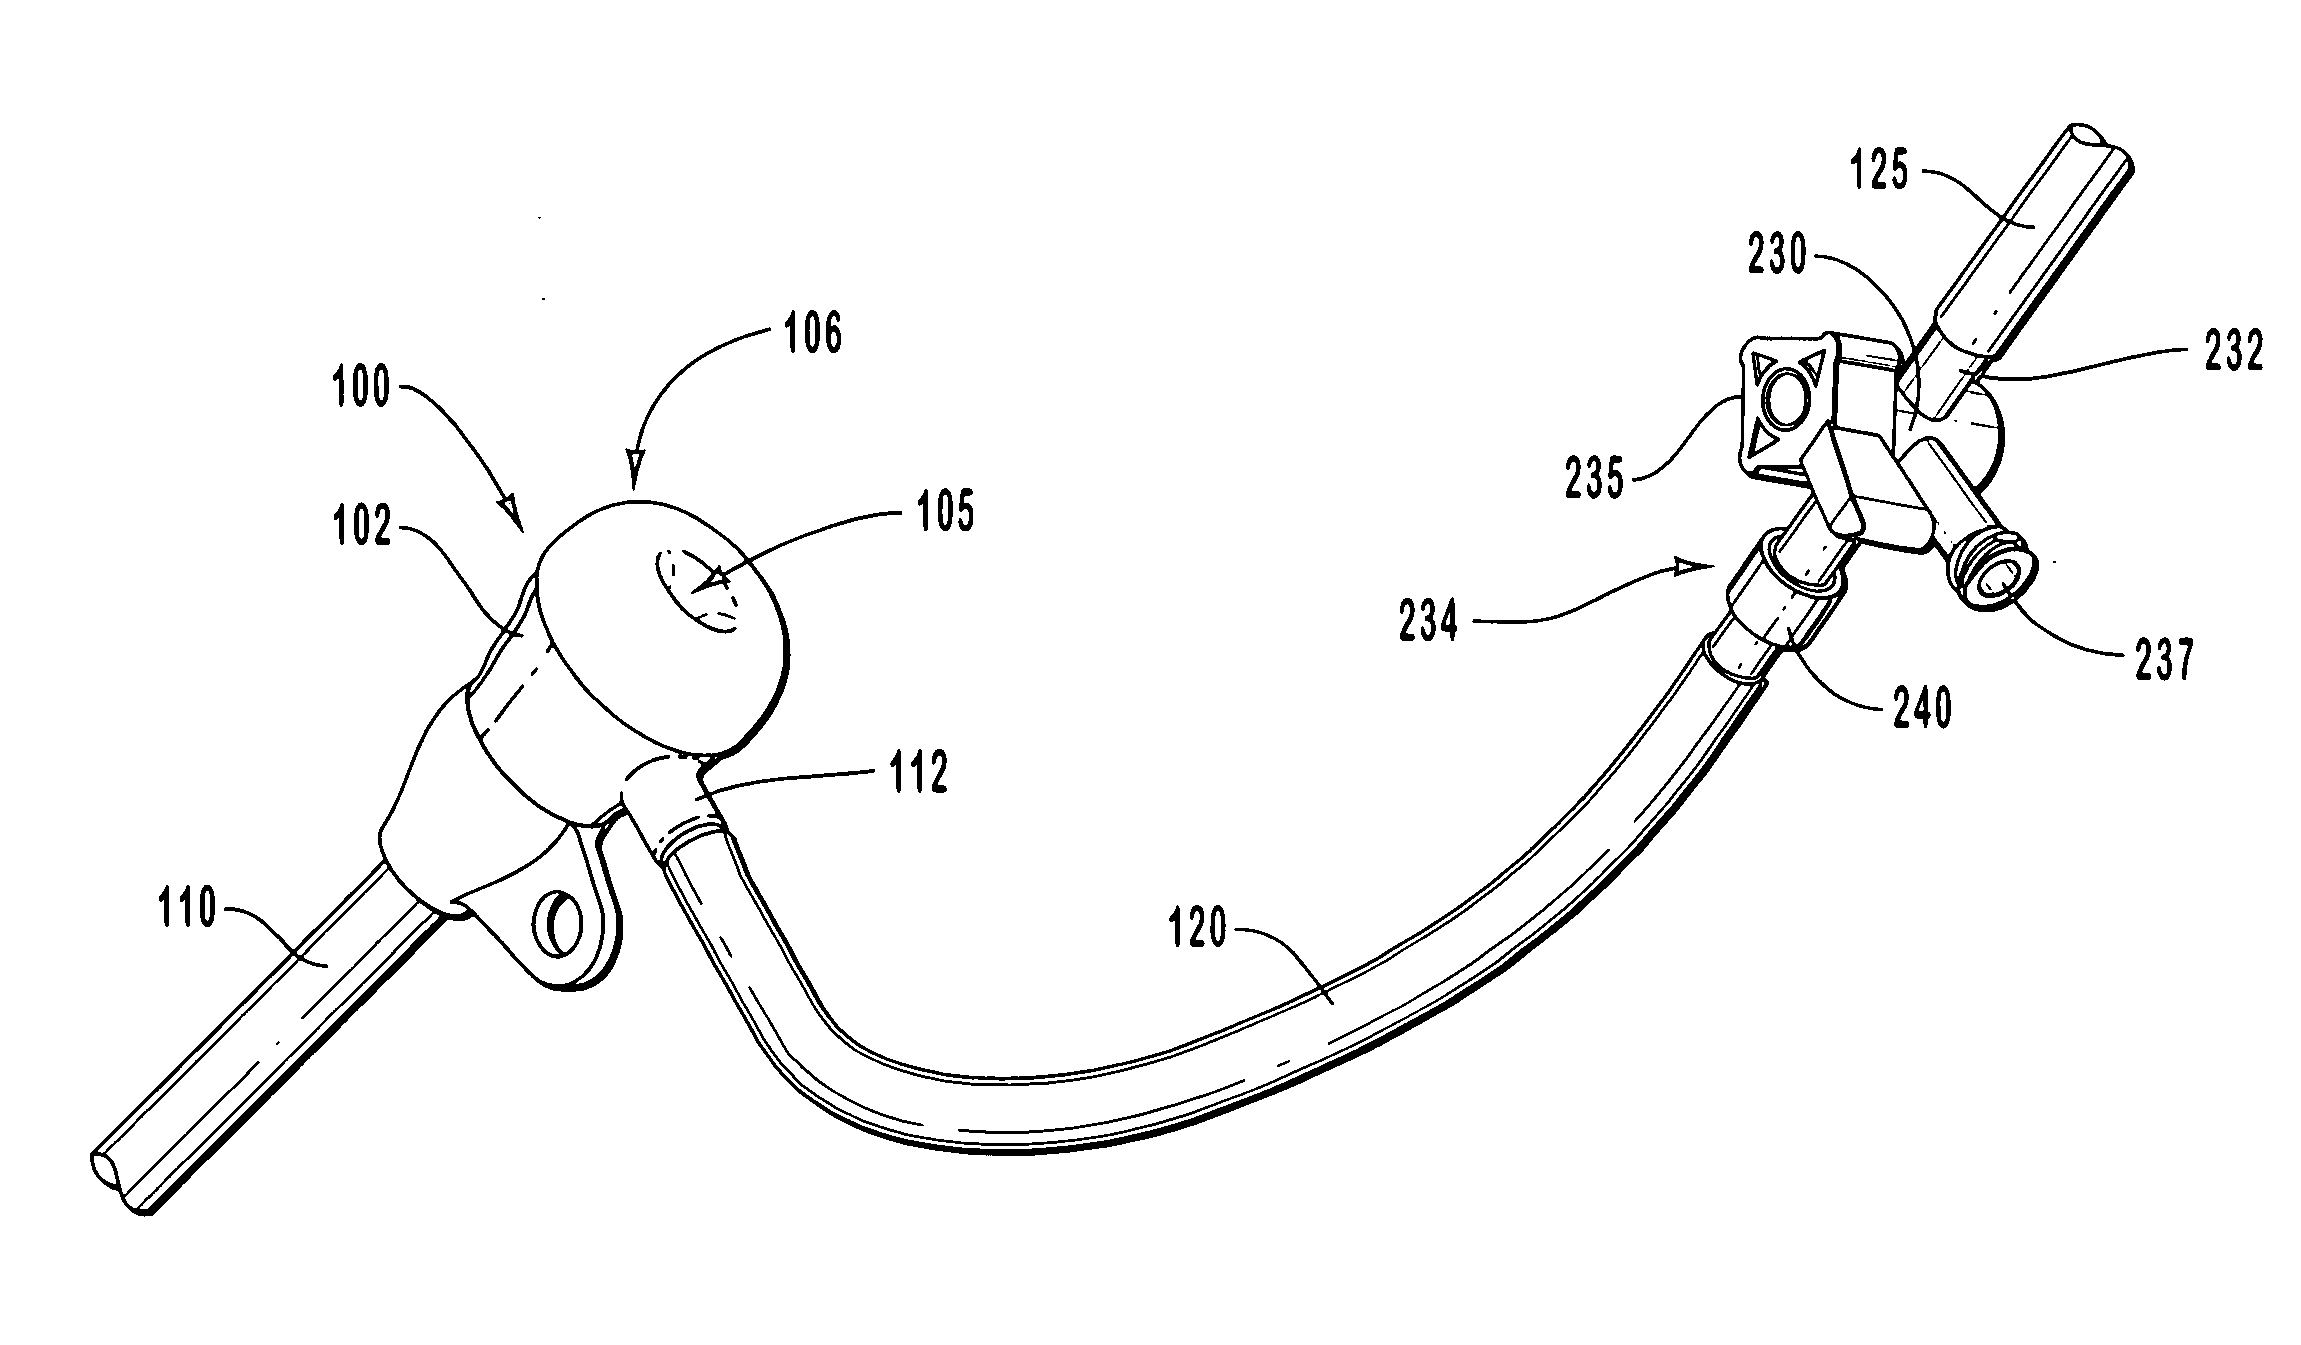 Introducer sheath with rotatable stop cock